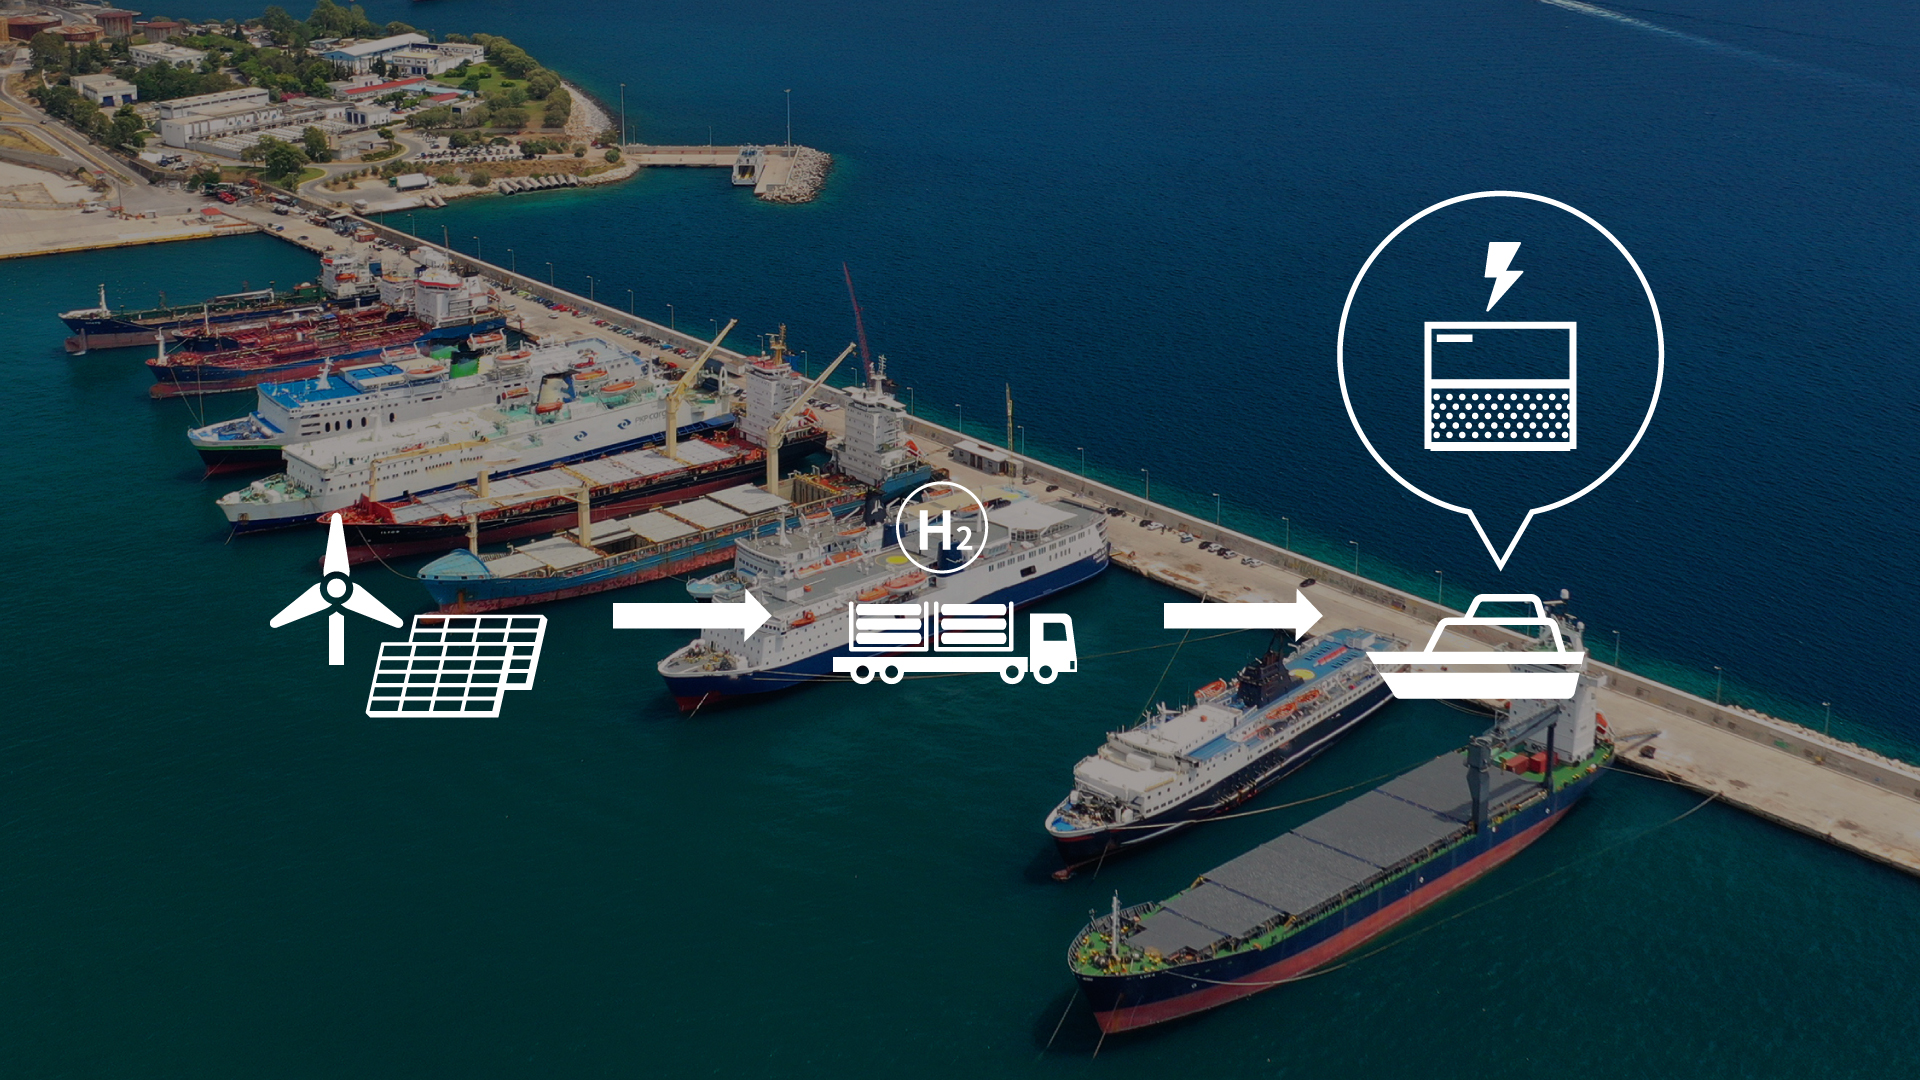 we are making Japan's first initiative to achieve zero emissions for ships using hydrogen